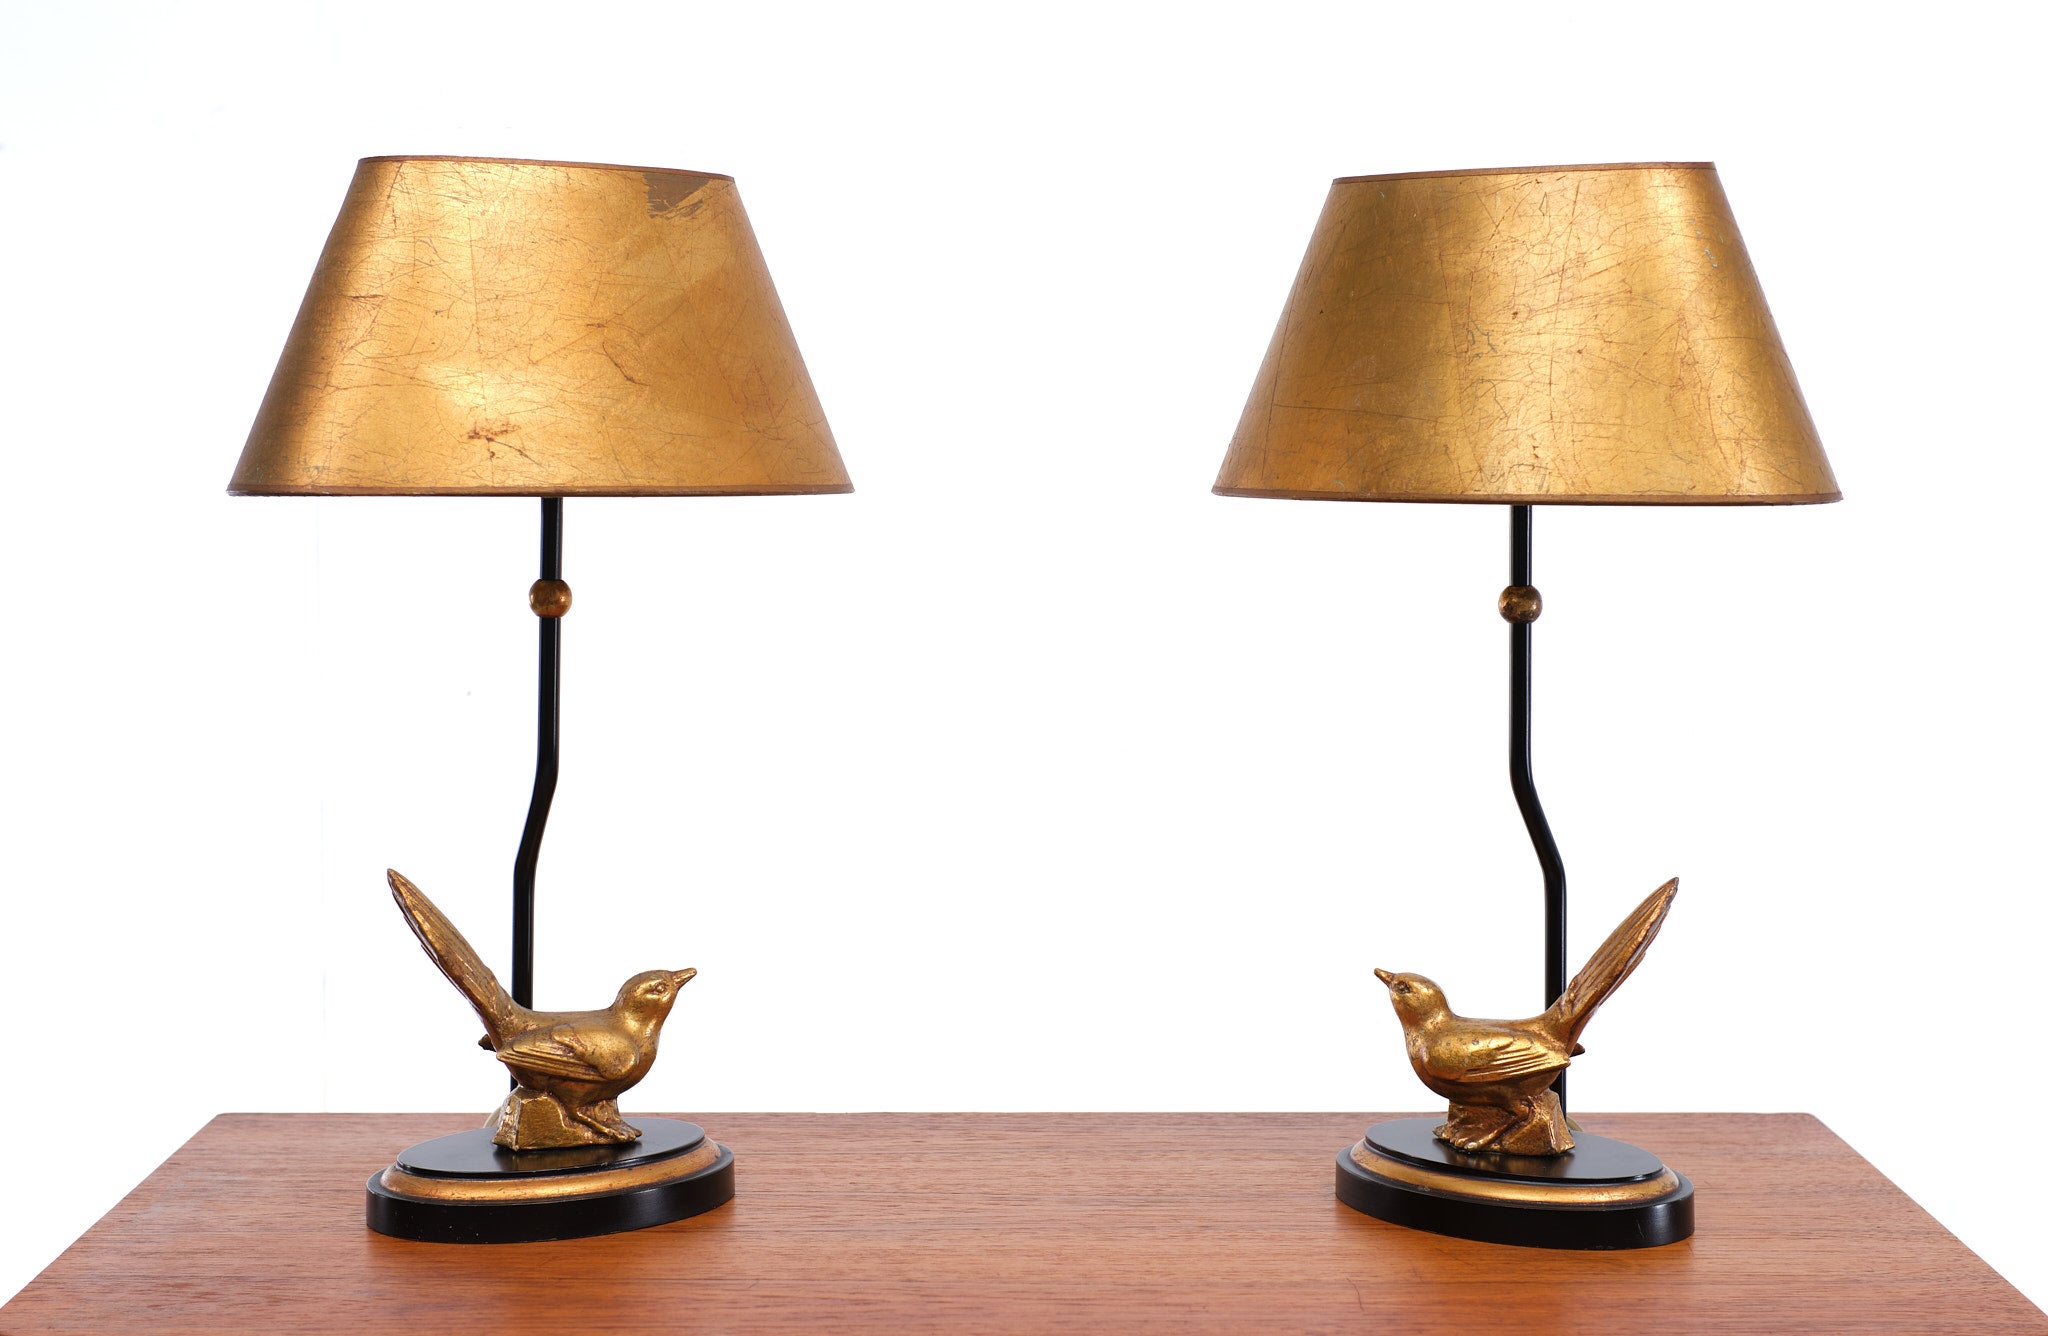 Very nice set of table lamps. Wooden base, comes with antique golden 
metal birds. With the matching golden shades. Manufactured by 
Kullmann lampen Germany. E27 large bulbs needed.